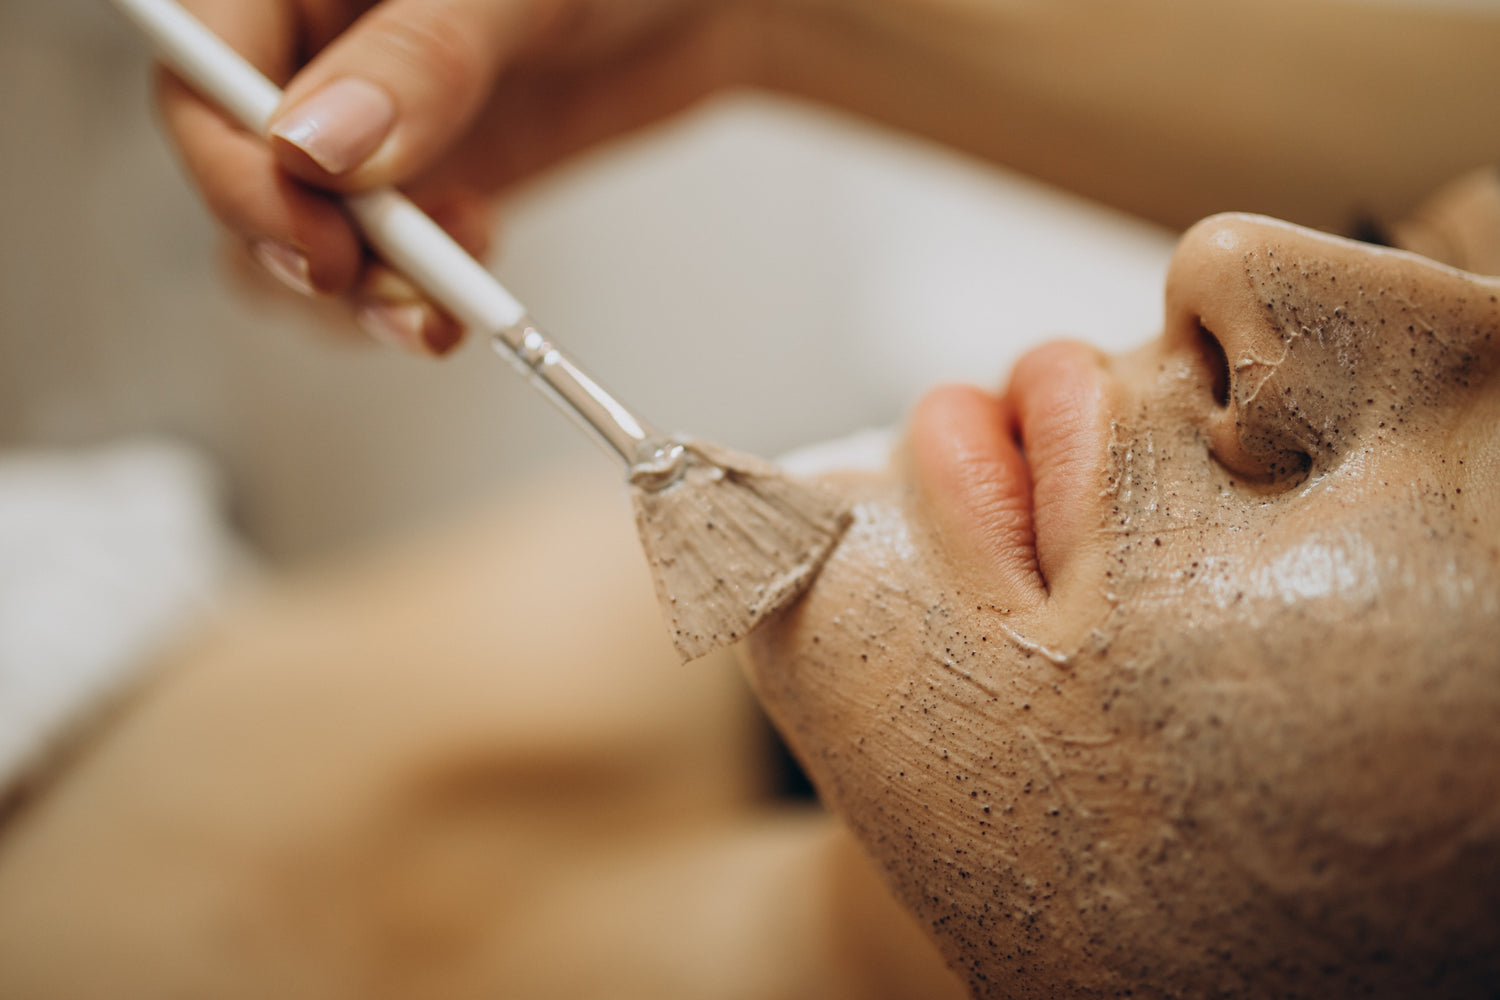 Understanding The Science Behind Chemical and Natural Exfoliants